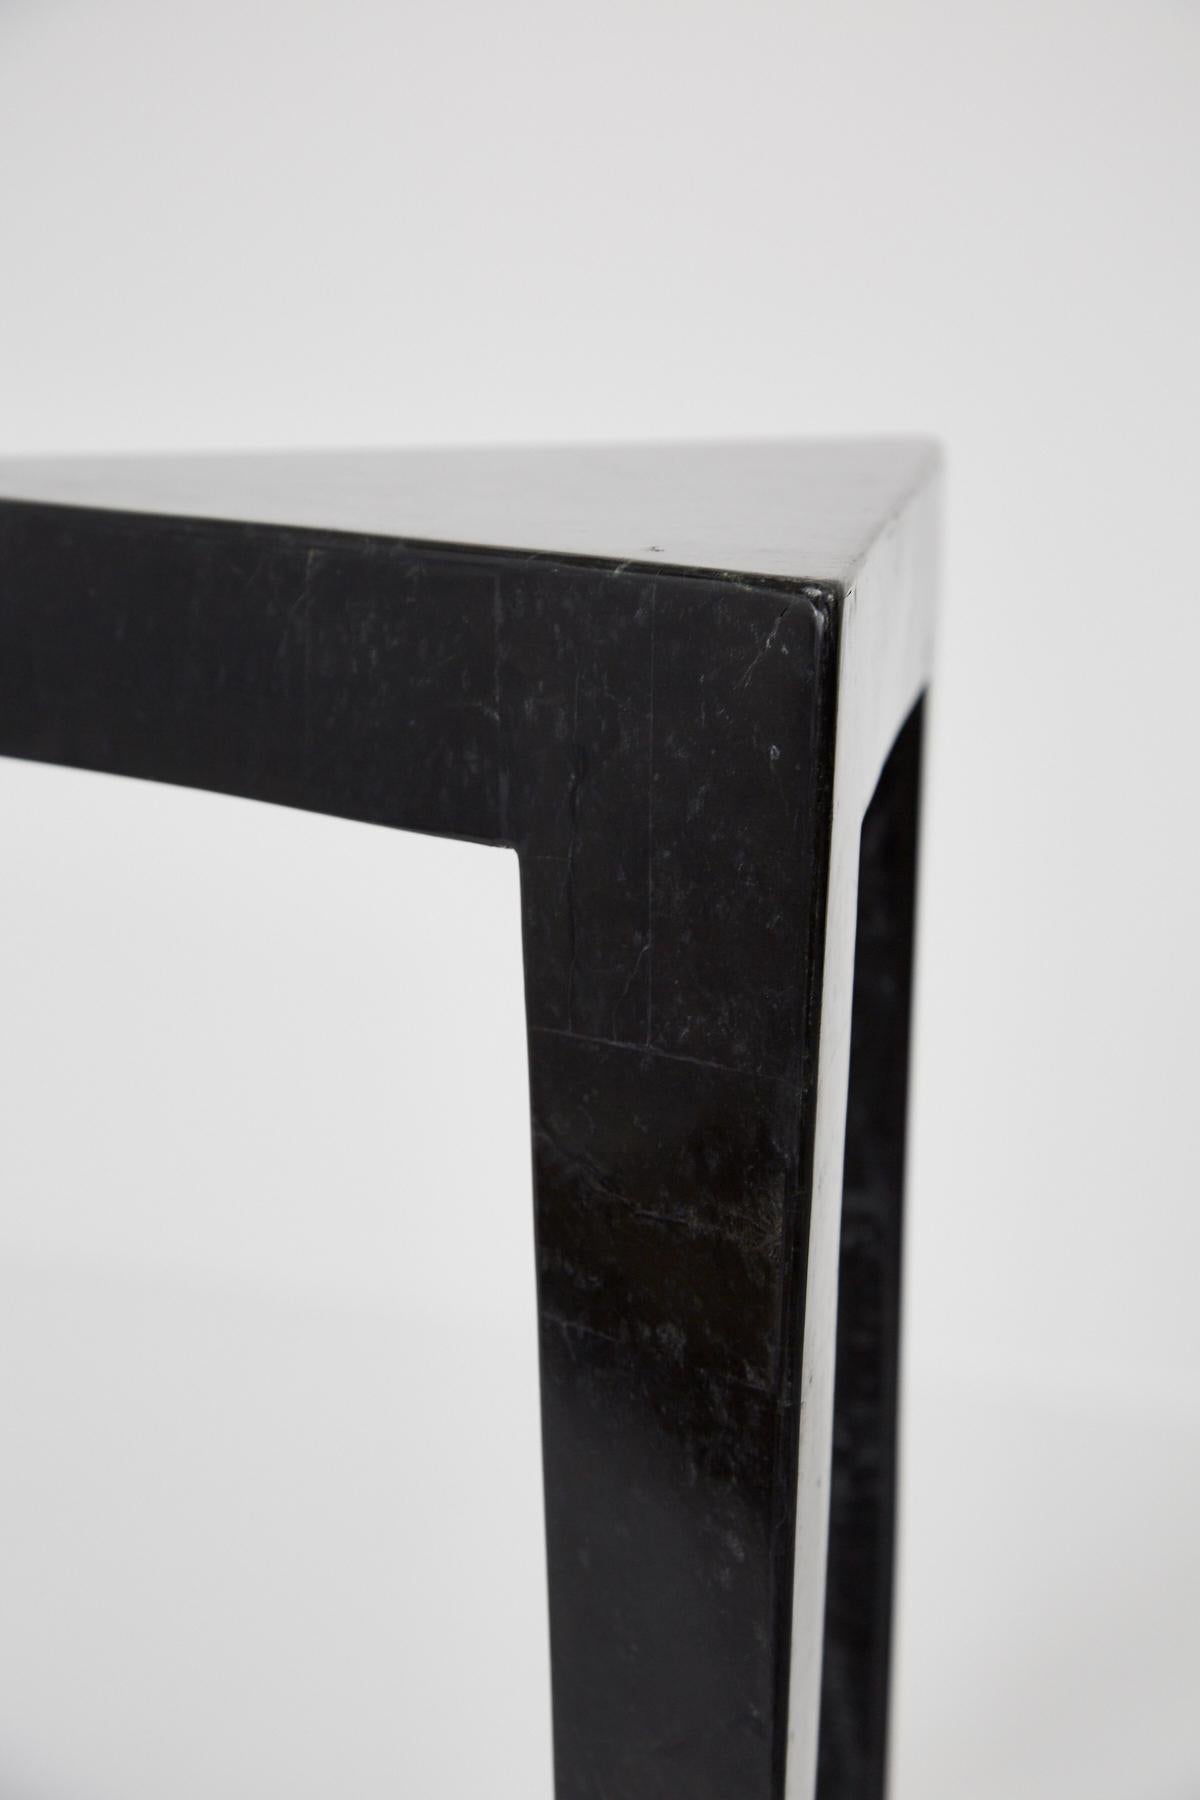 Black Tessellated Stone Triangular Nesting Tables, 1990s In Excellent Condition For Sale In Los Angeles, CA